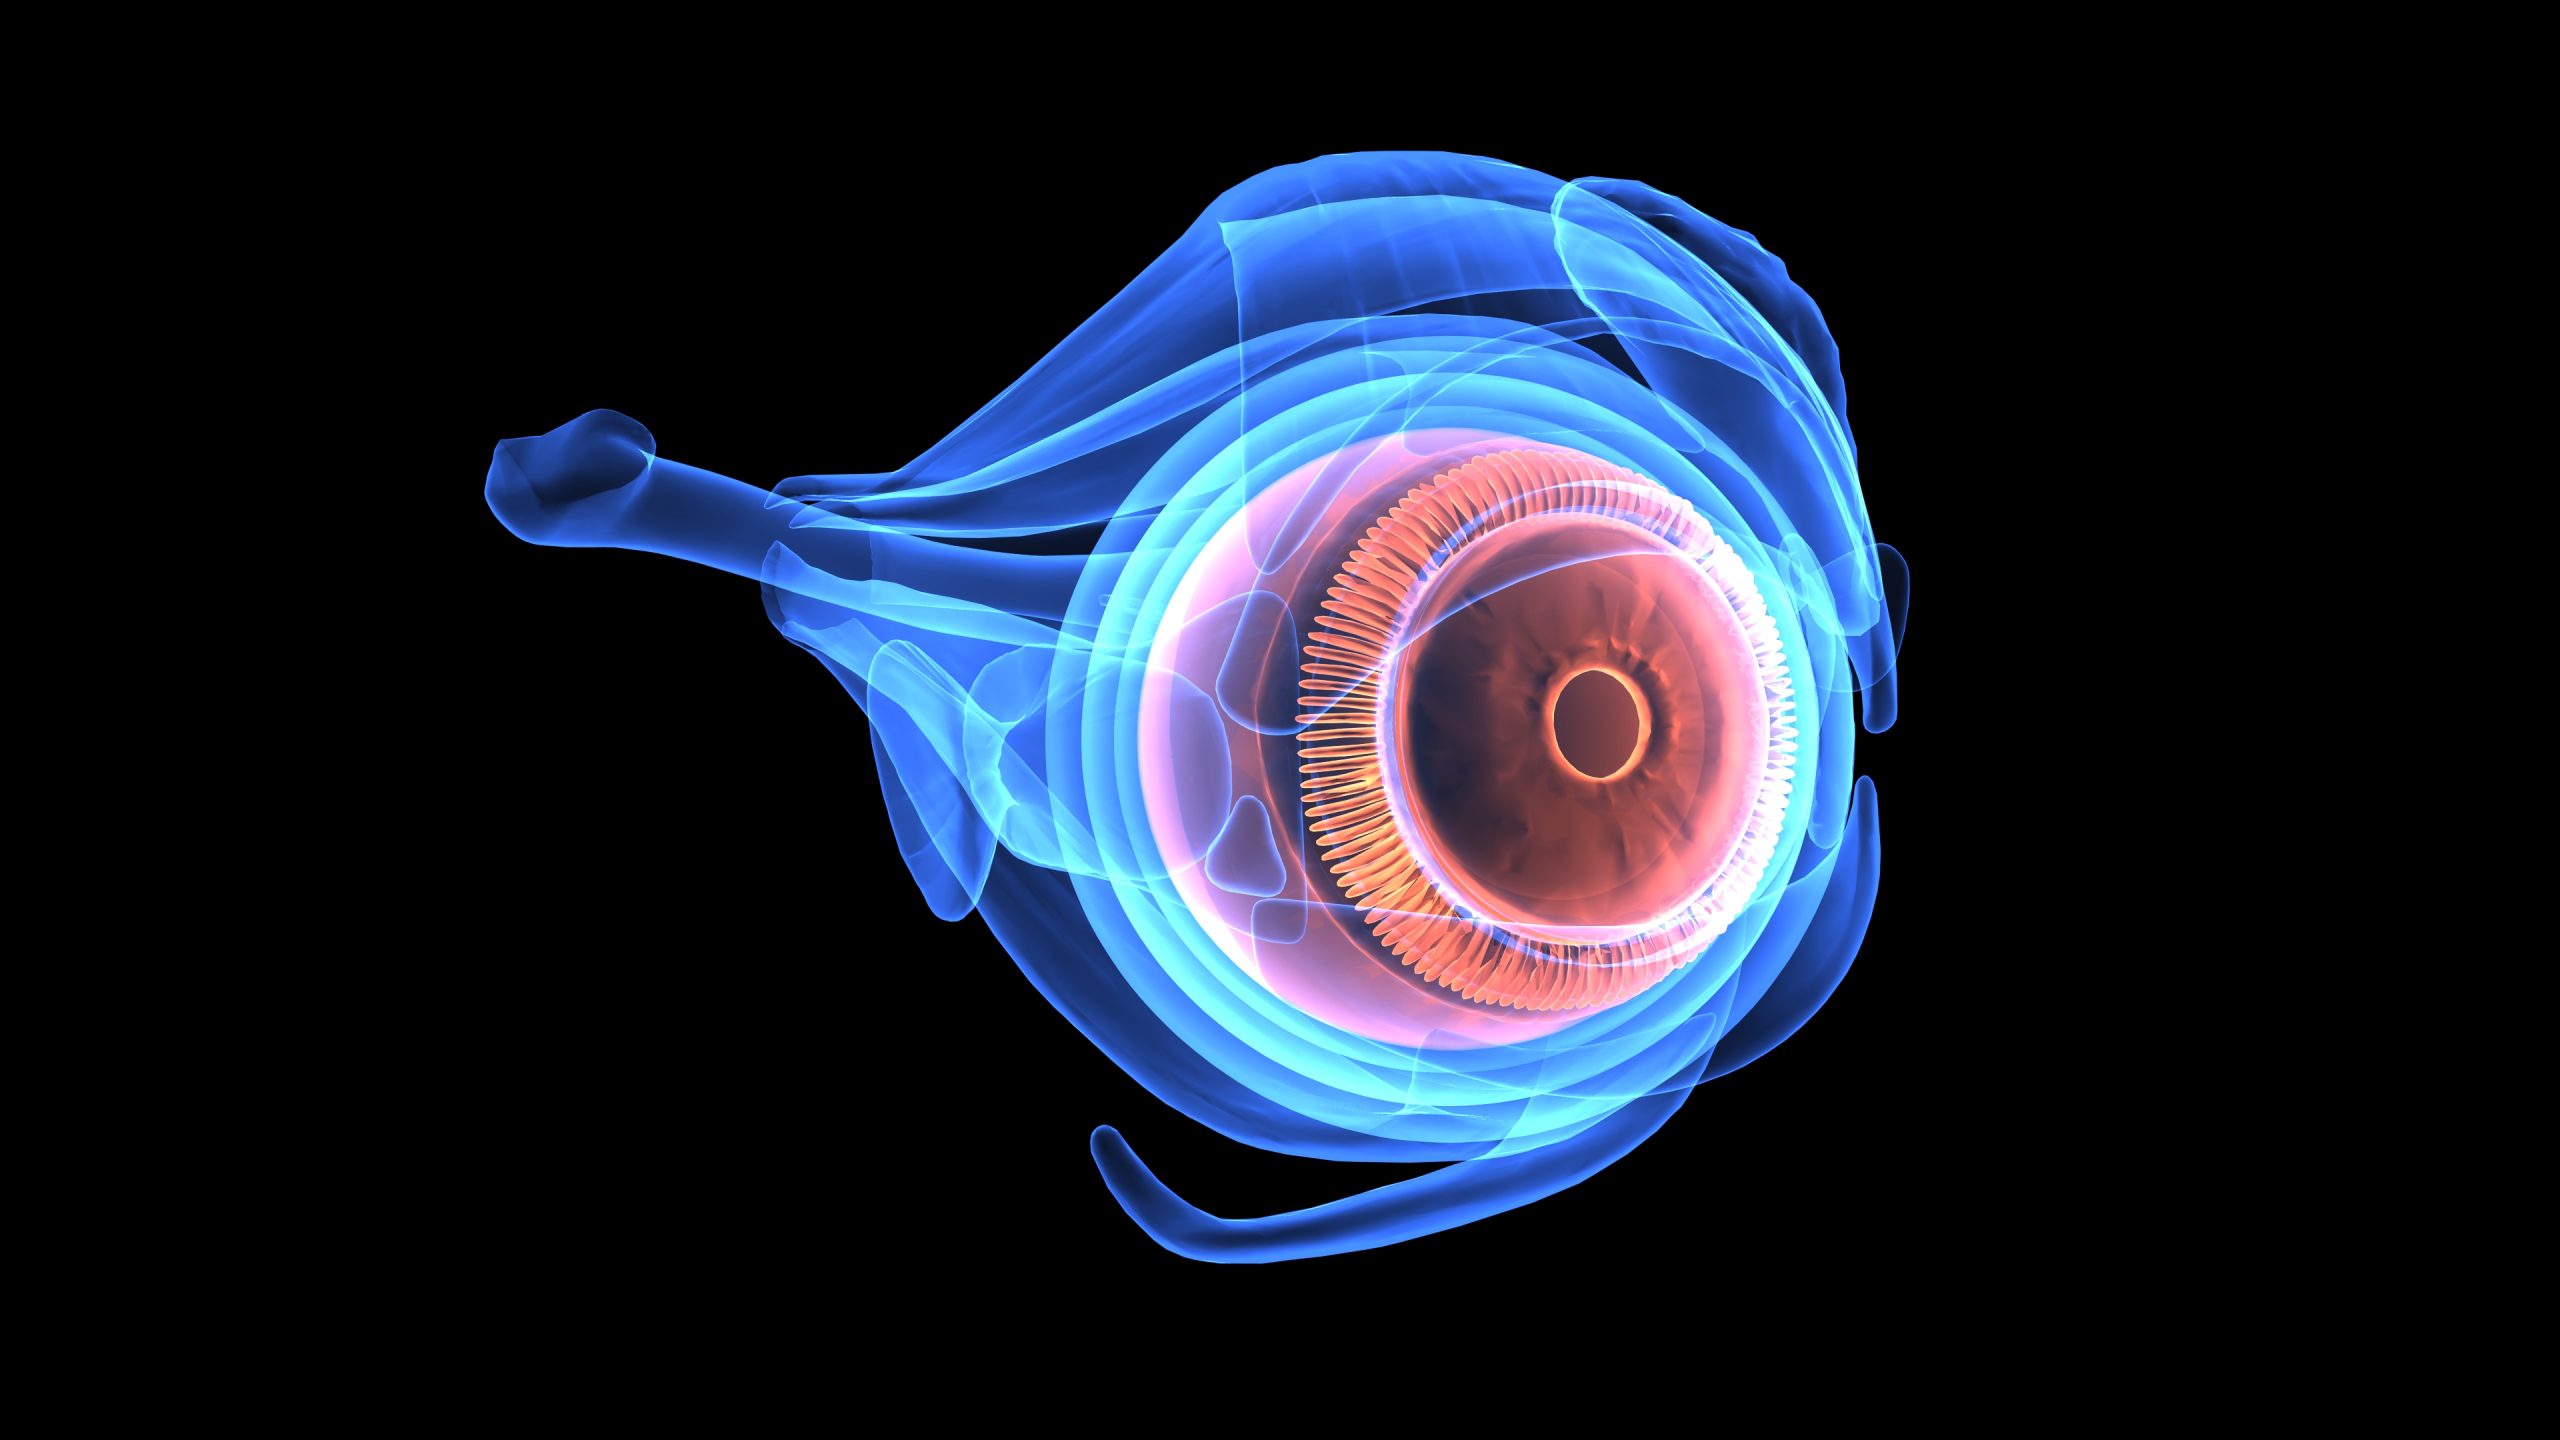 4D Imaging Technology for Real-Time Visualization of Eye Anatomy